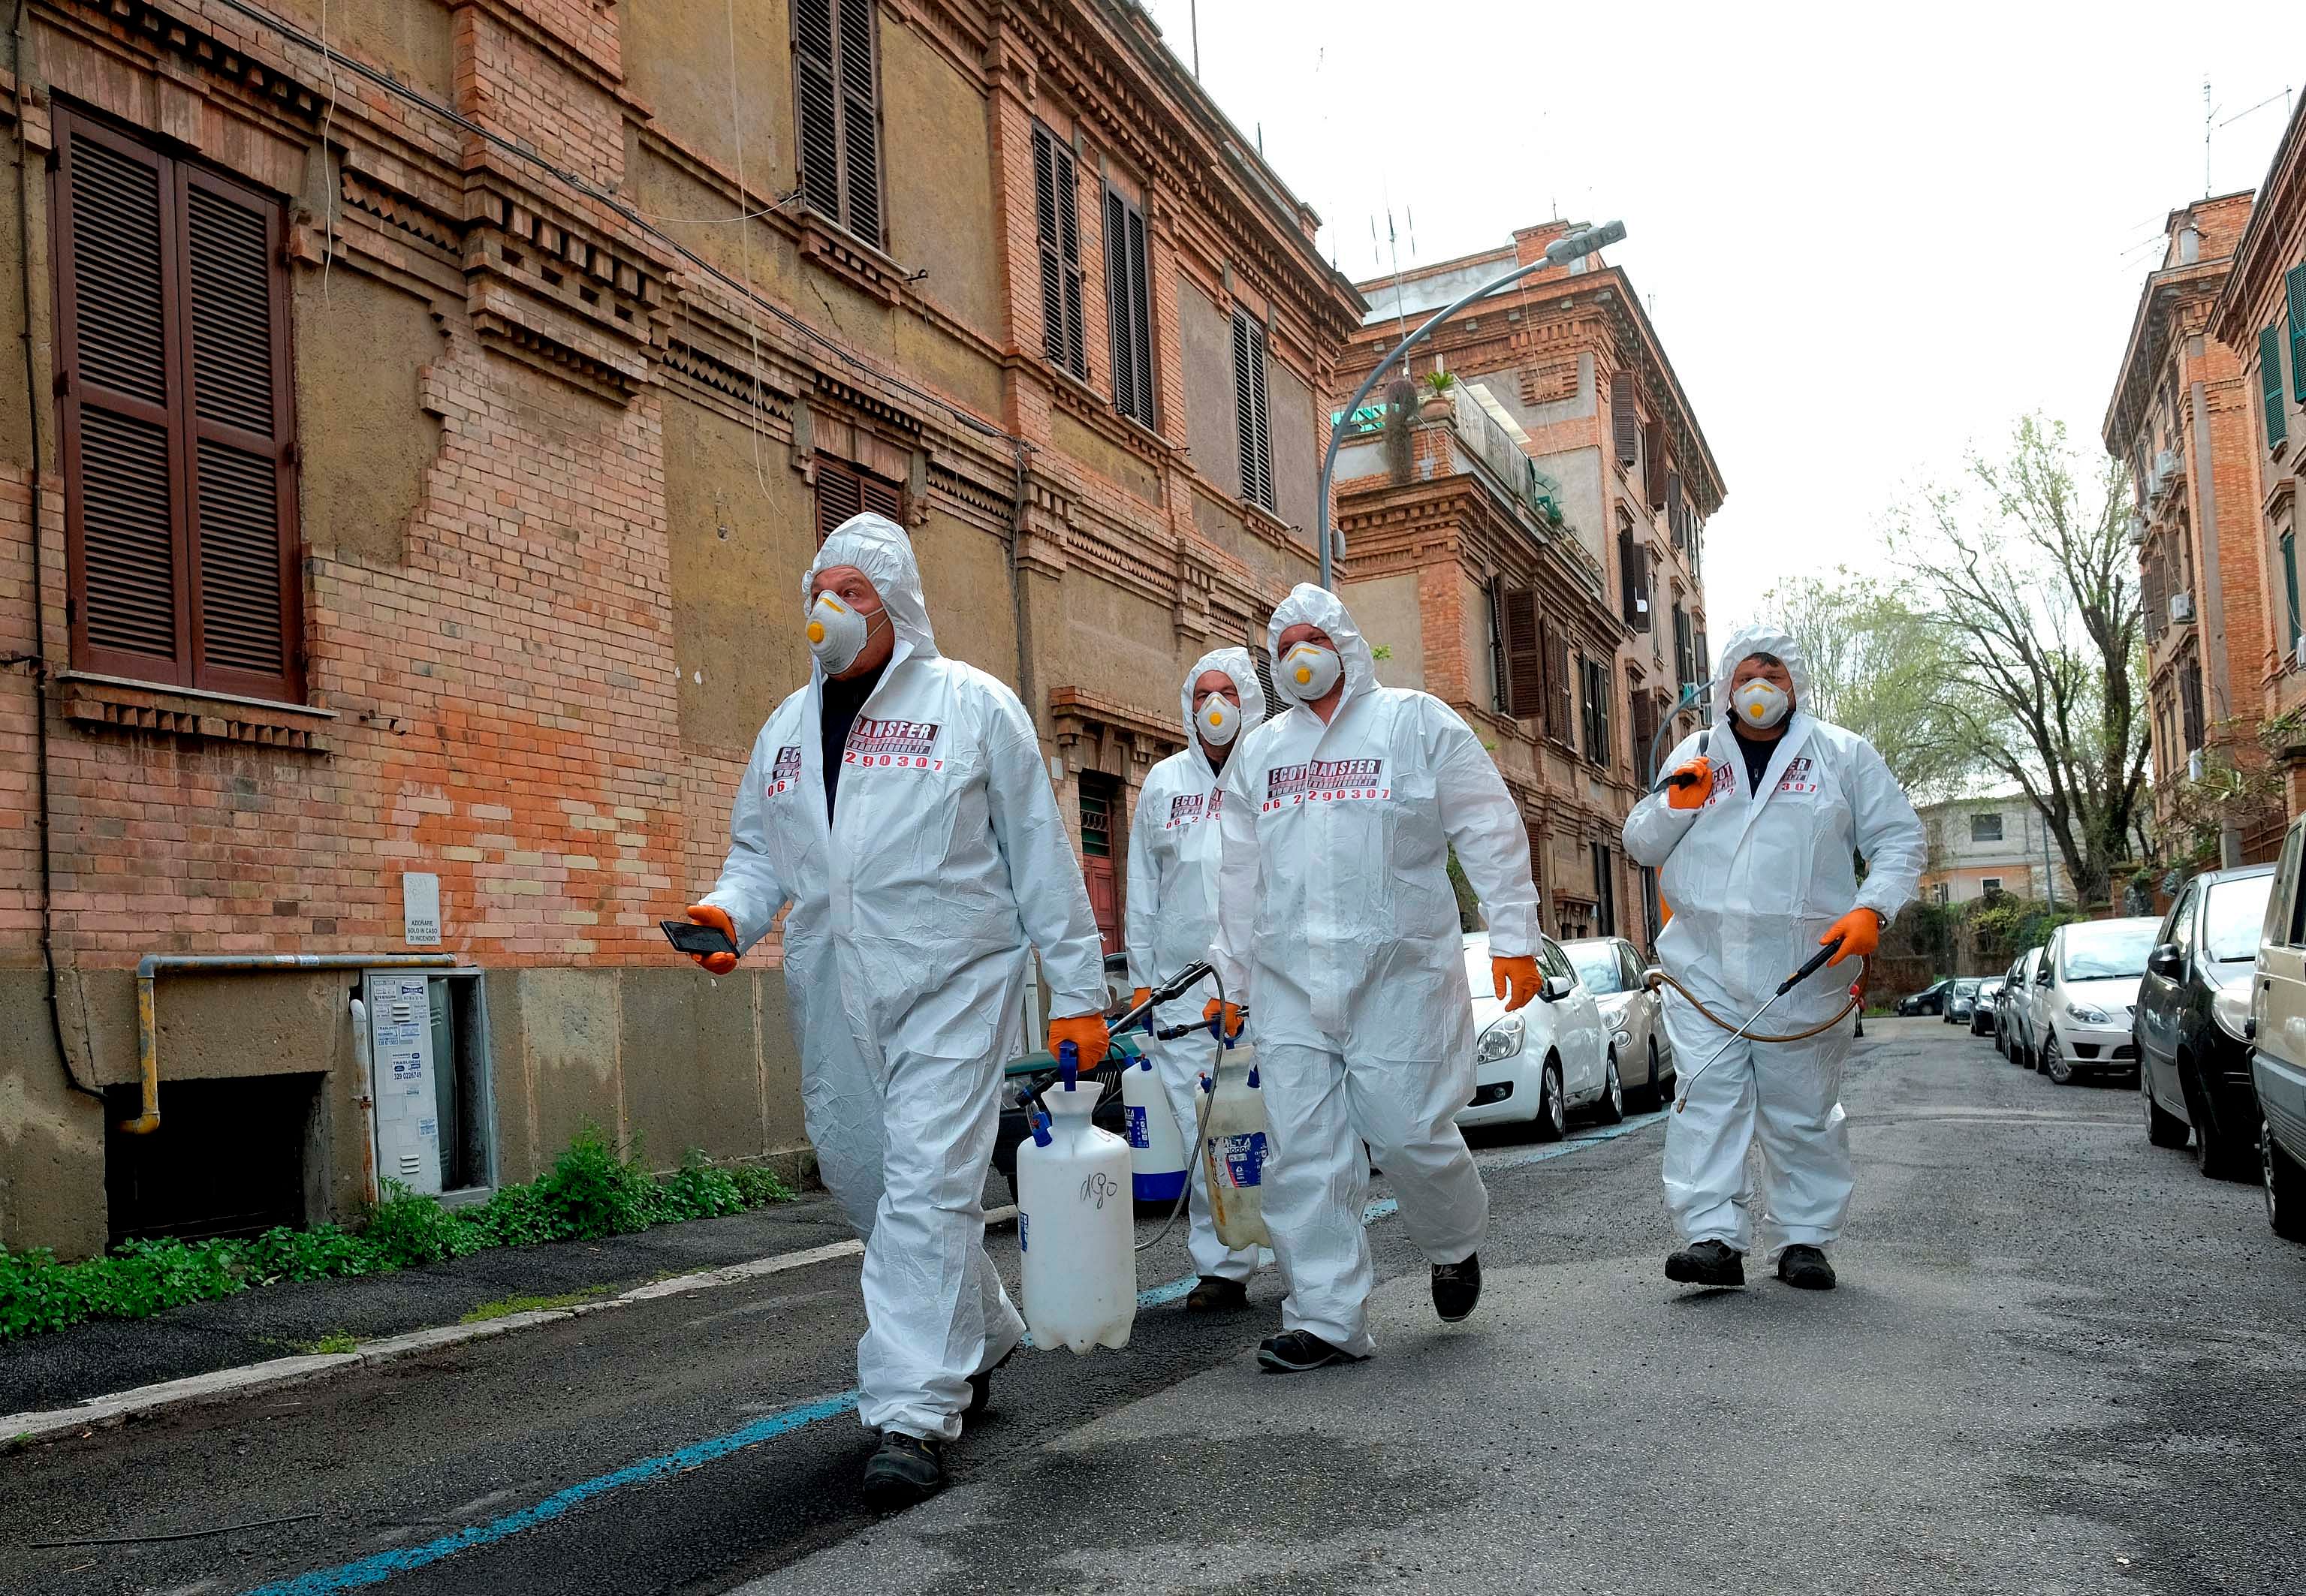 Rome: Workers wearing protective outfits sanitize a neighbourhood. (Credit: AP)